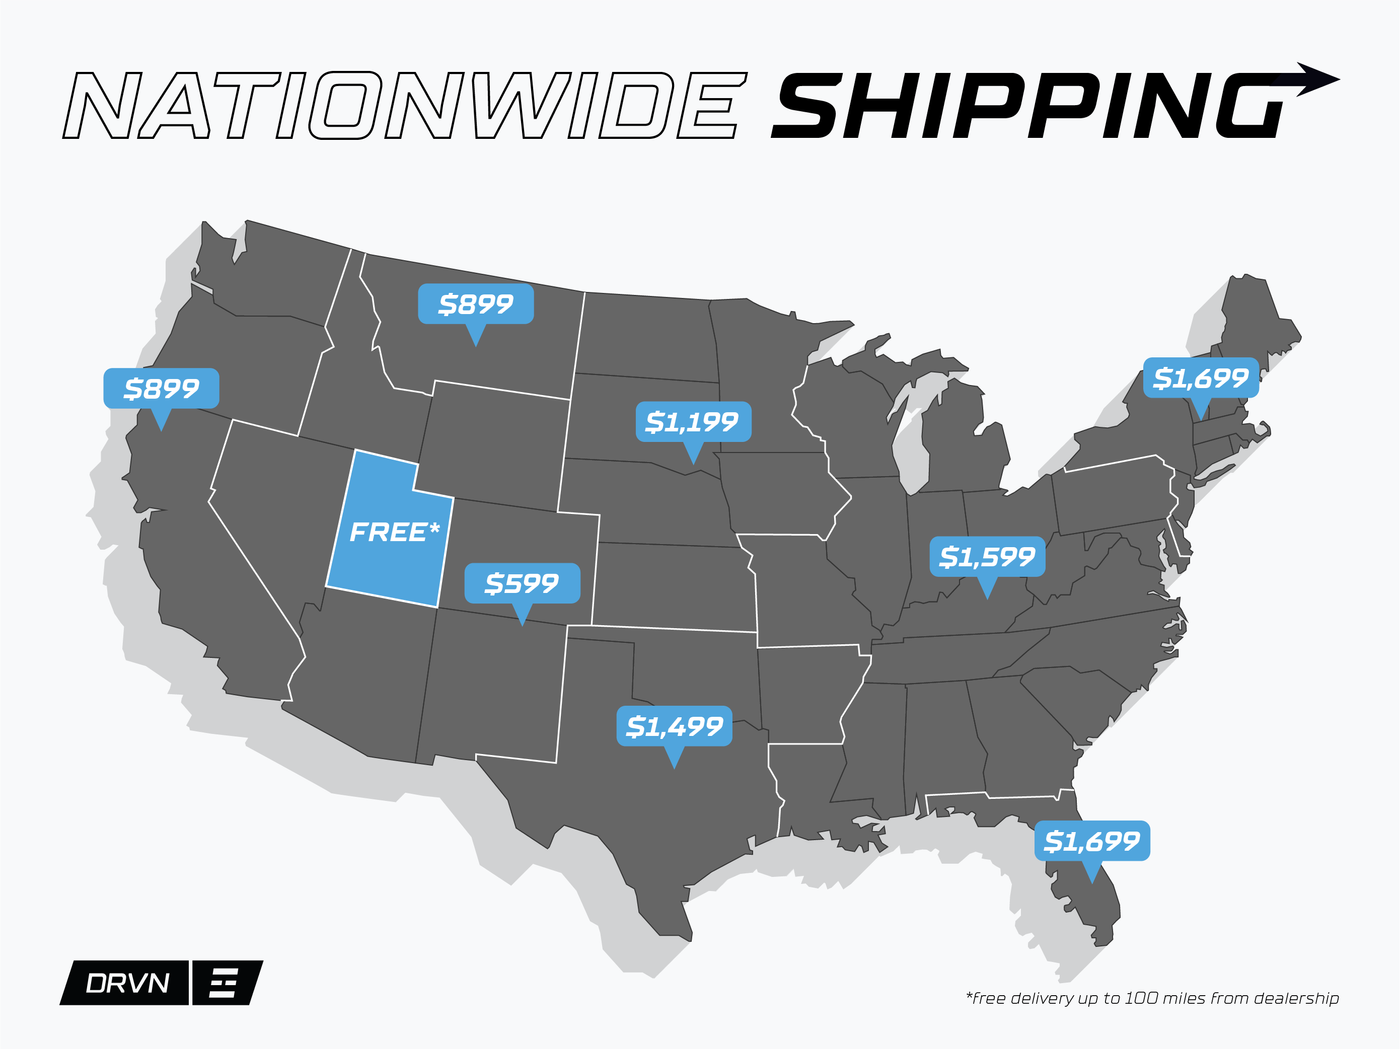 Nationwide+Shipping+Map.png